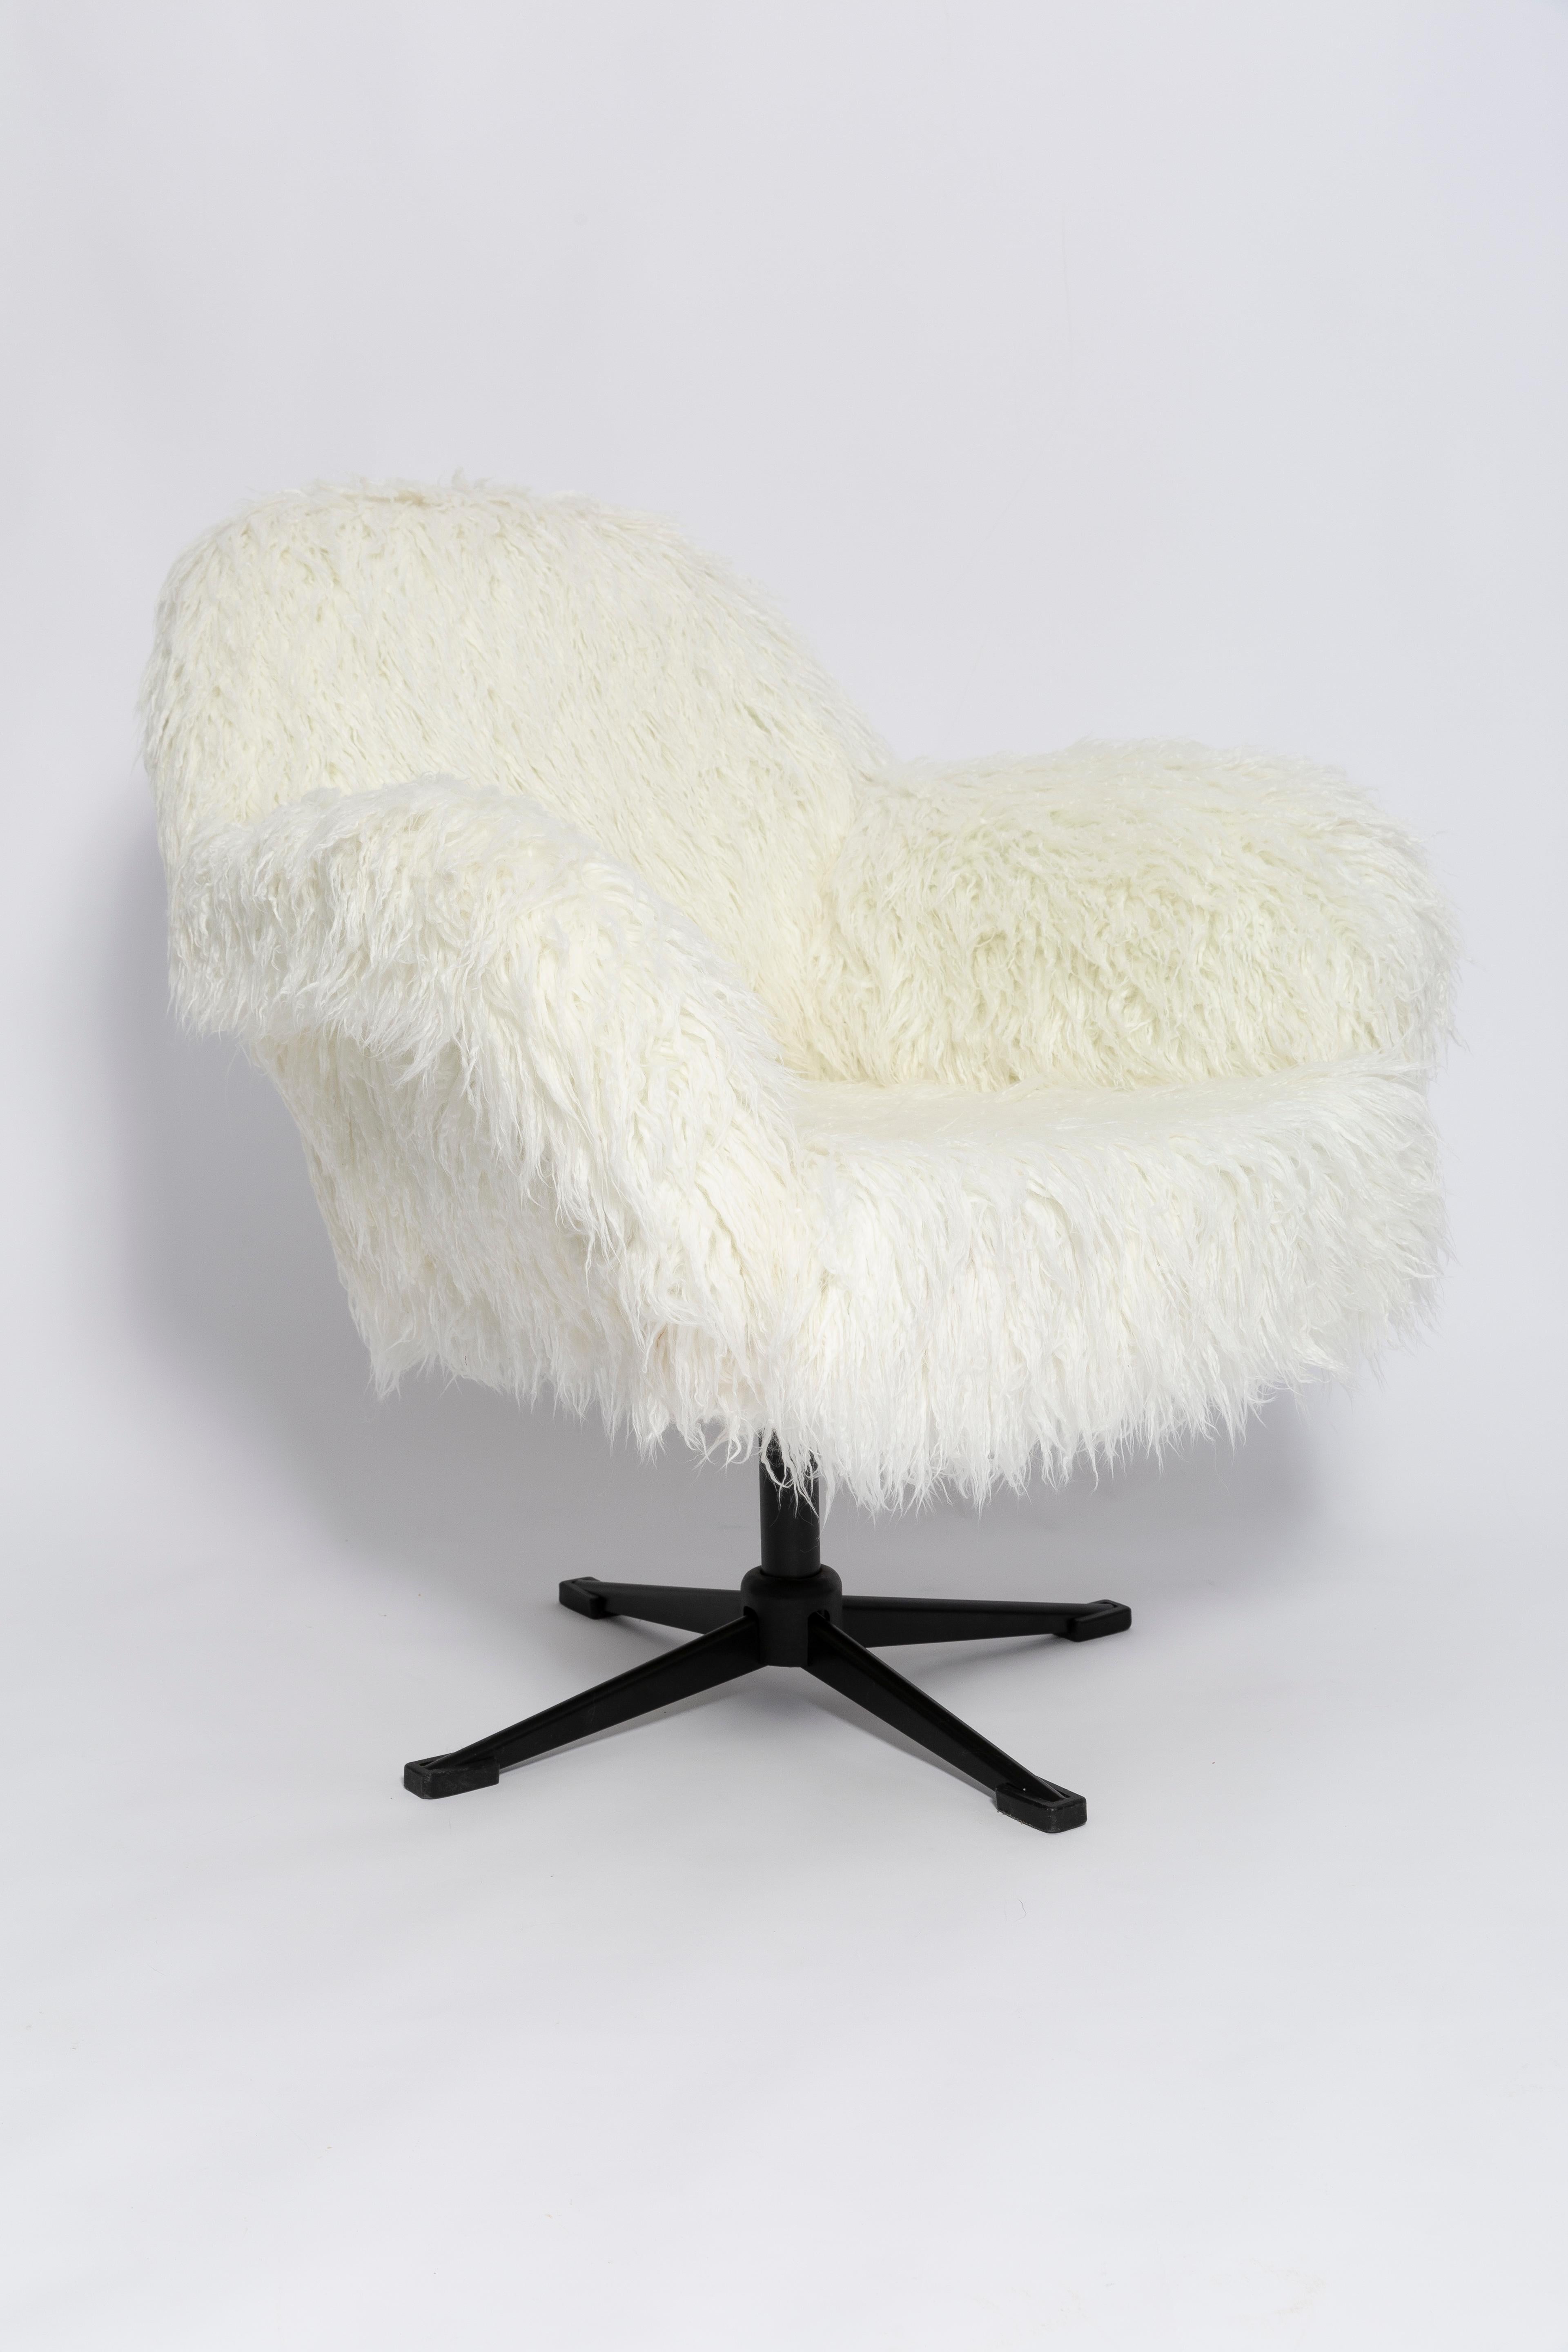 Metalwork Pair of 20th Century Vintage White Faux Alpaca Hair Swivel Armchairs, 1960s For Sale